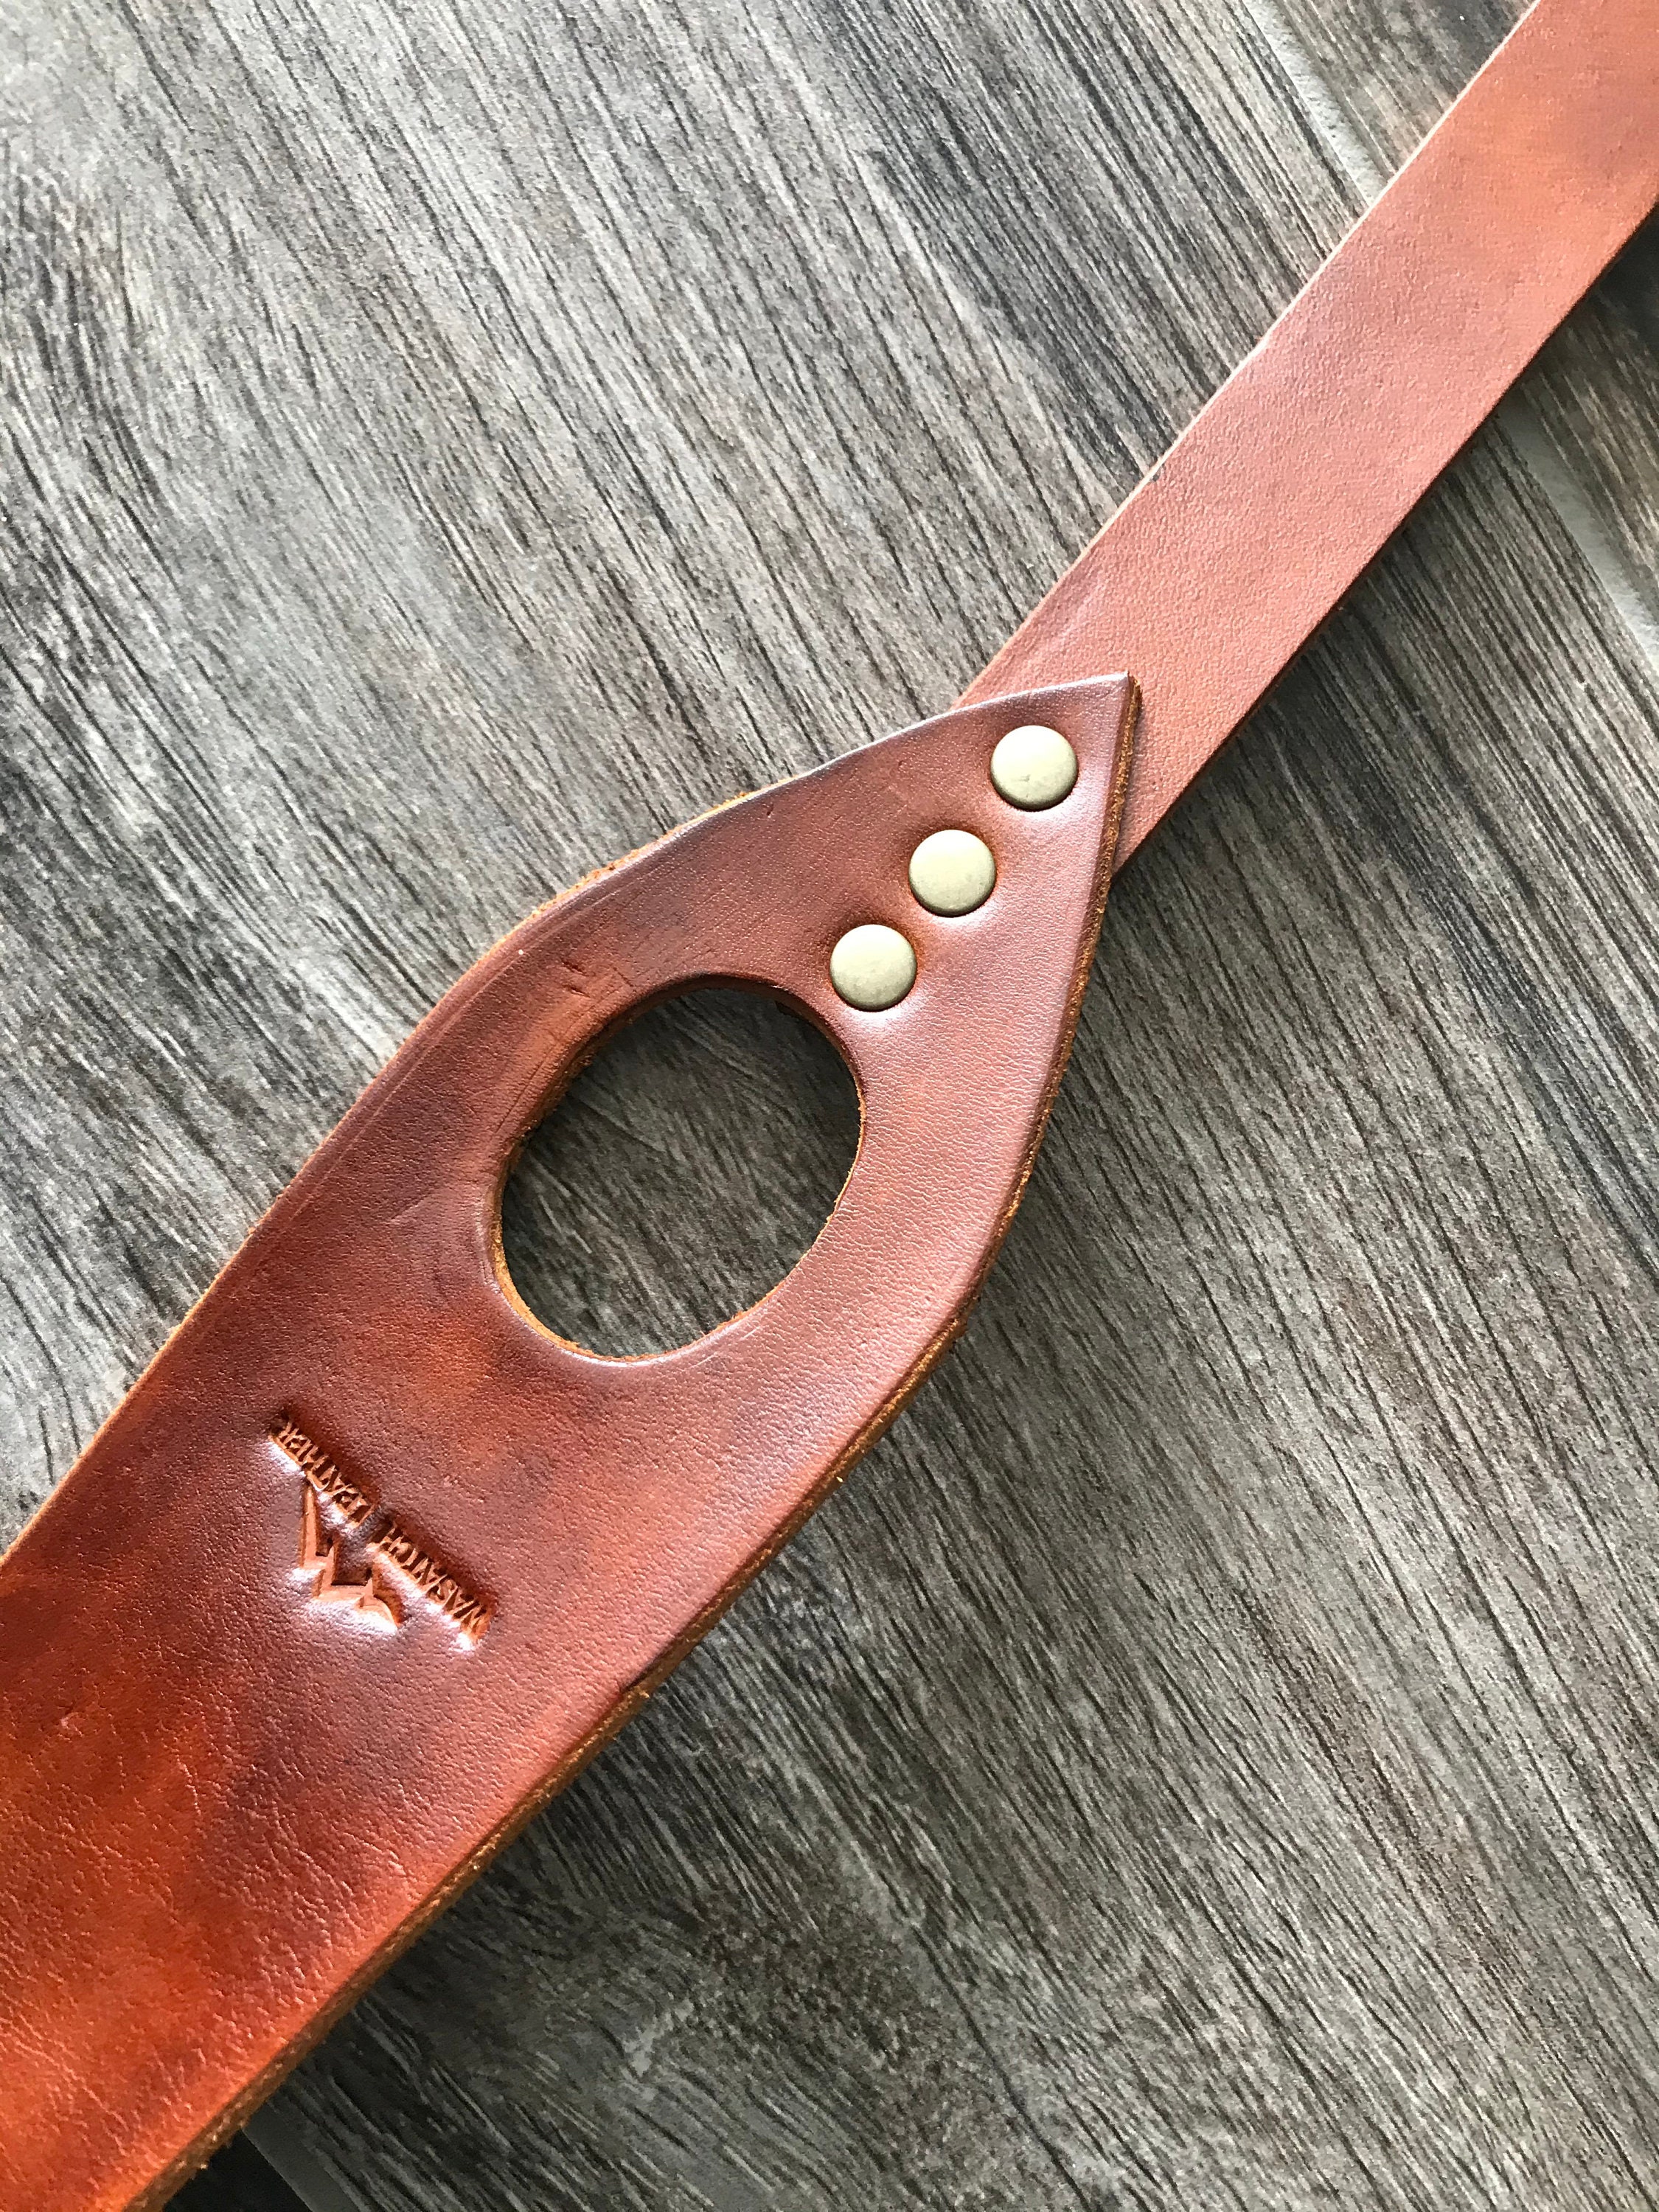 Personalized Leather Rifle Sling (Gun Sling), Adjustable, with ...